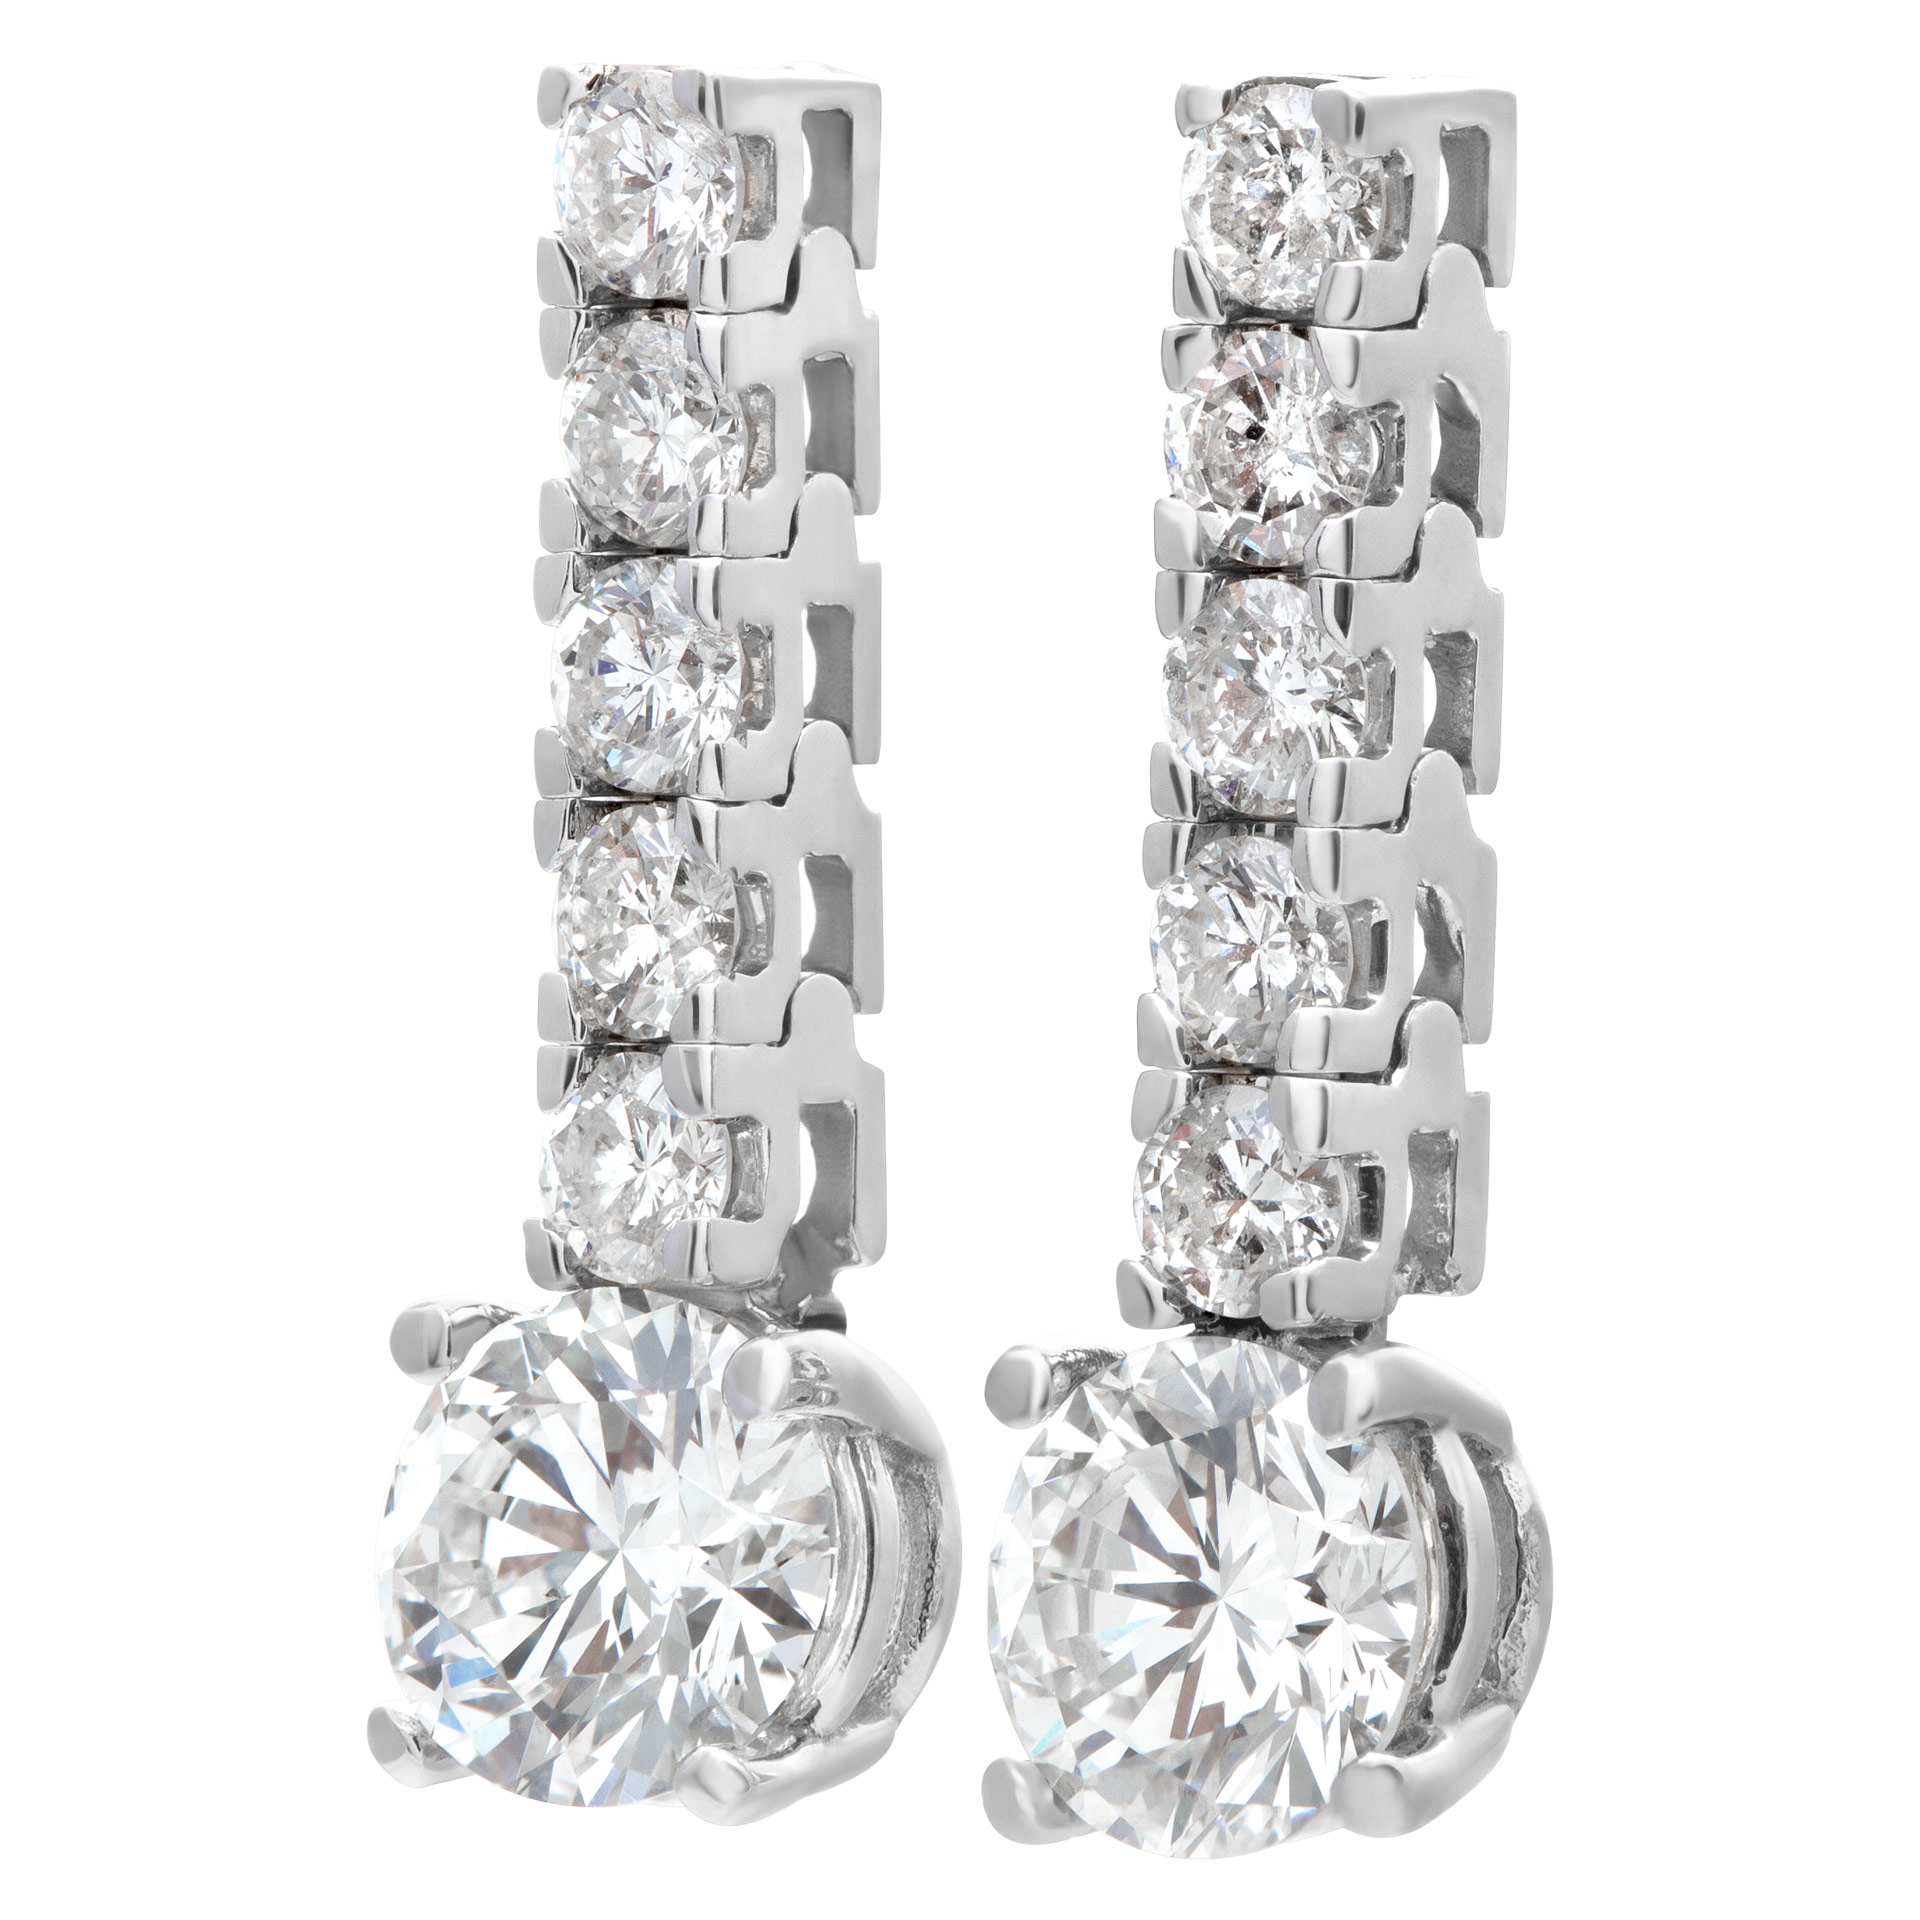 Line of diamond earrings. Approx. 1 carat each with additional 1 ct in line. image 2